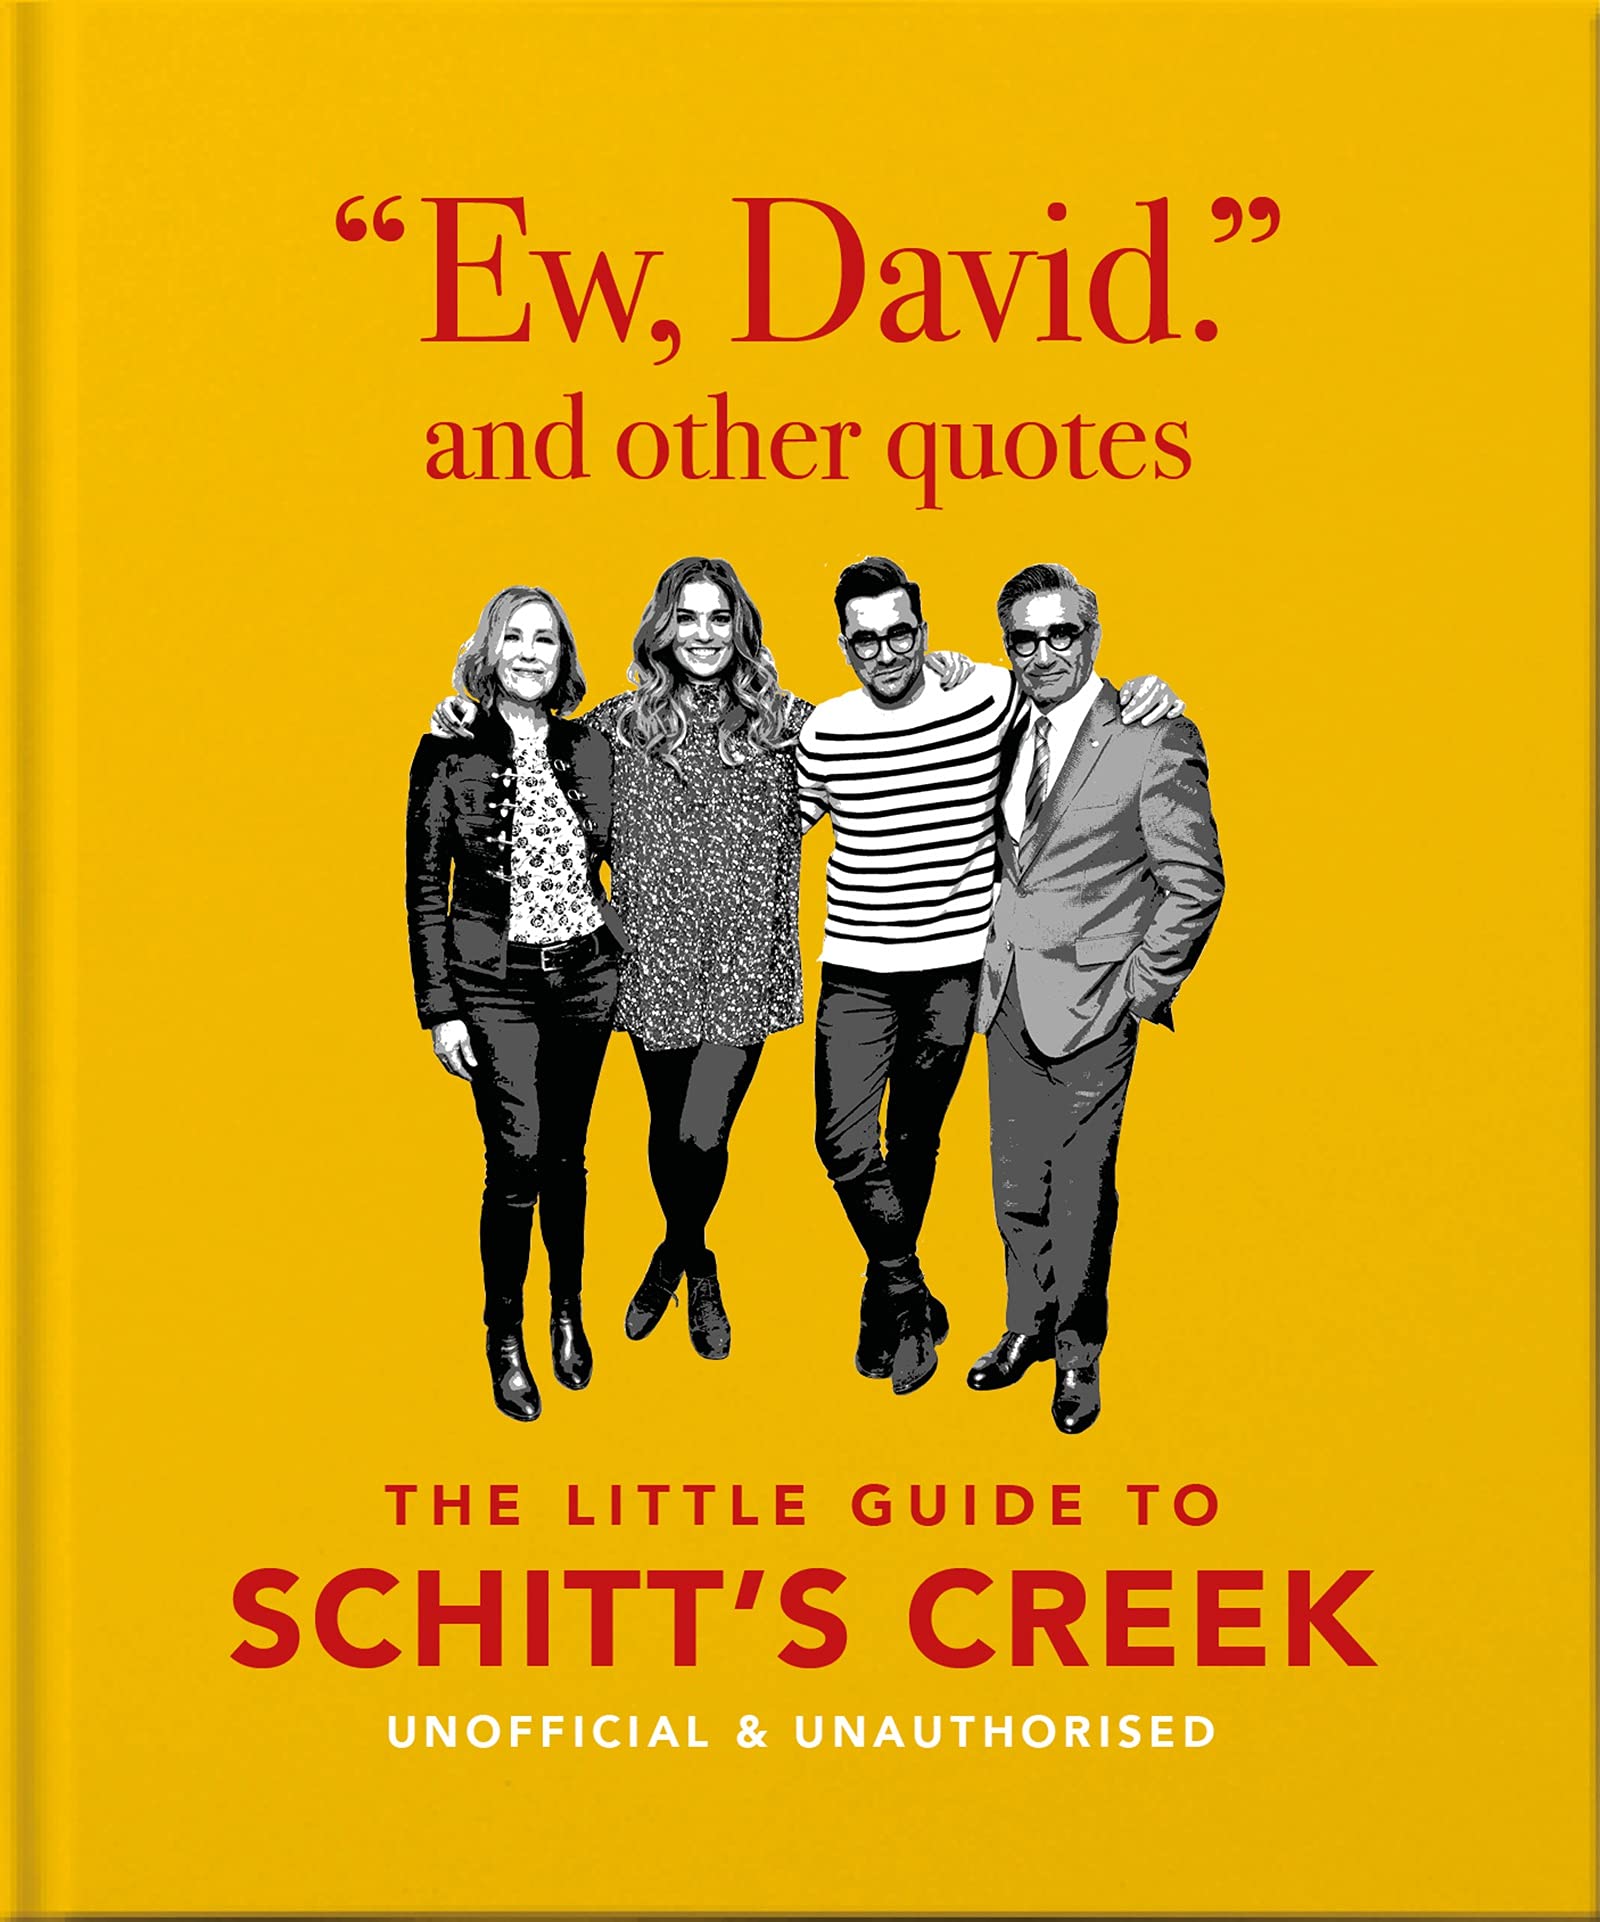 Ew, David, and Other Schitty Quotes |